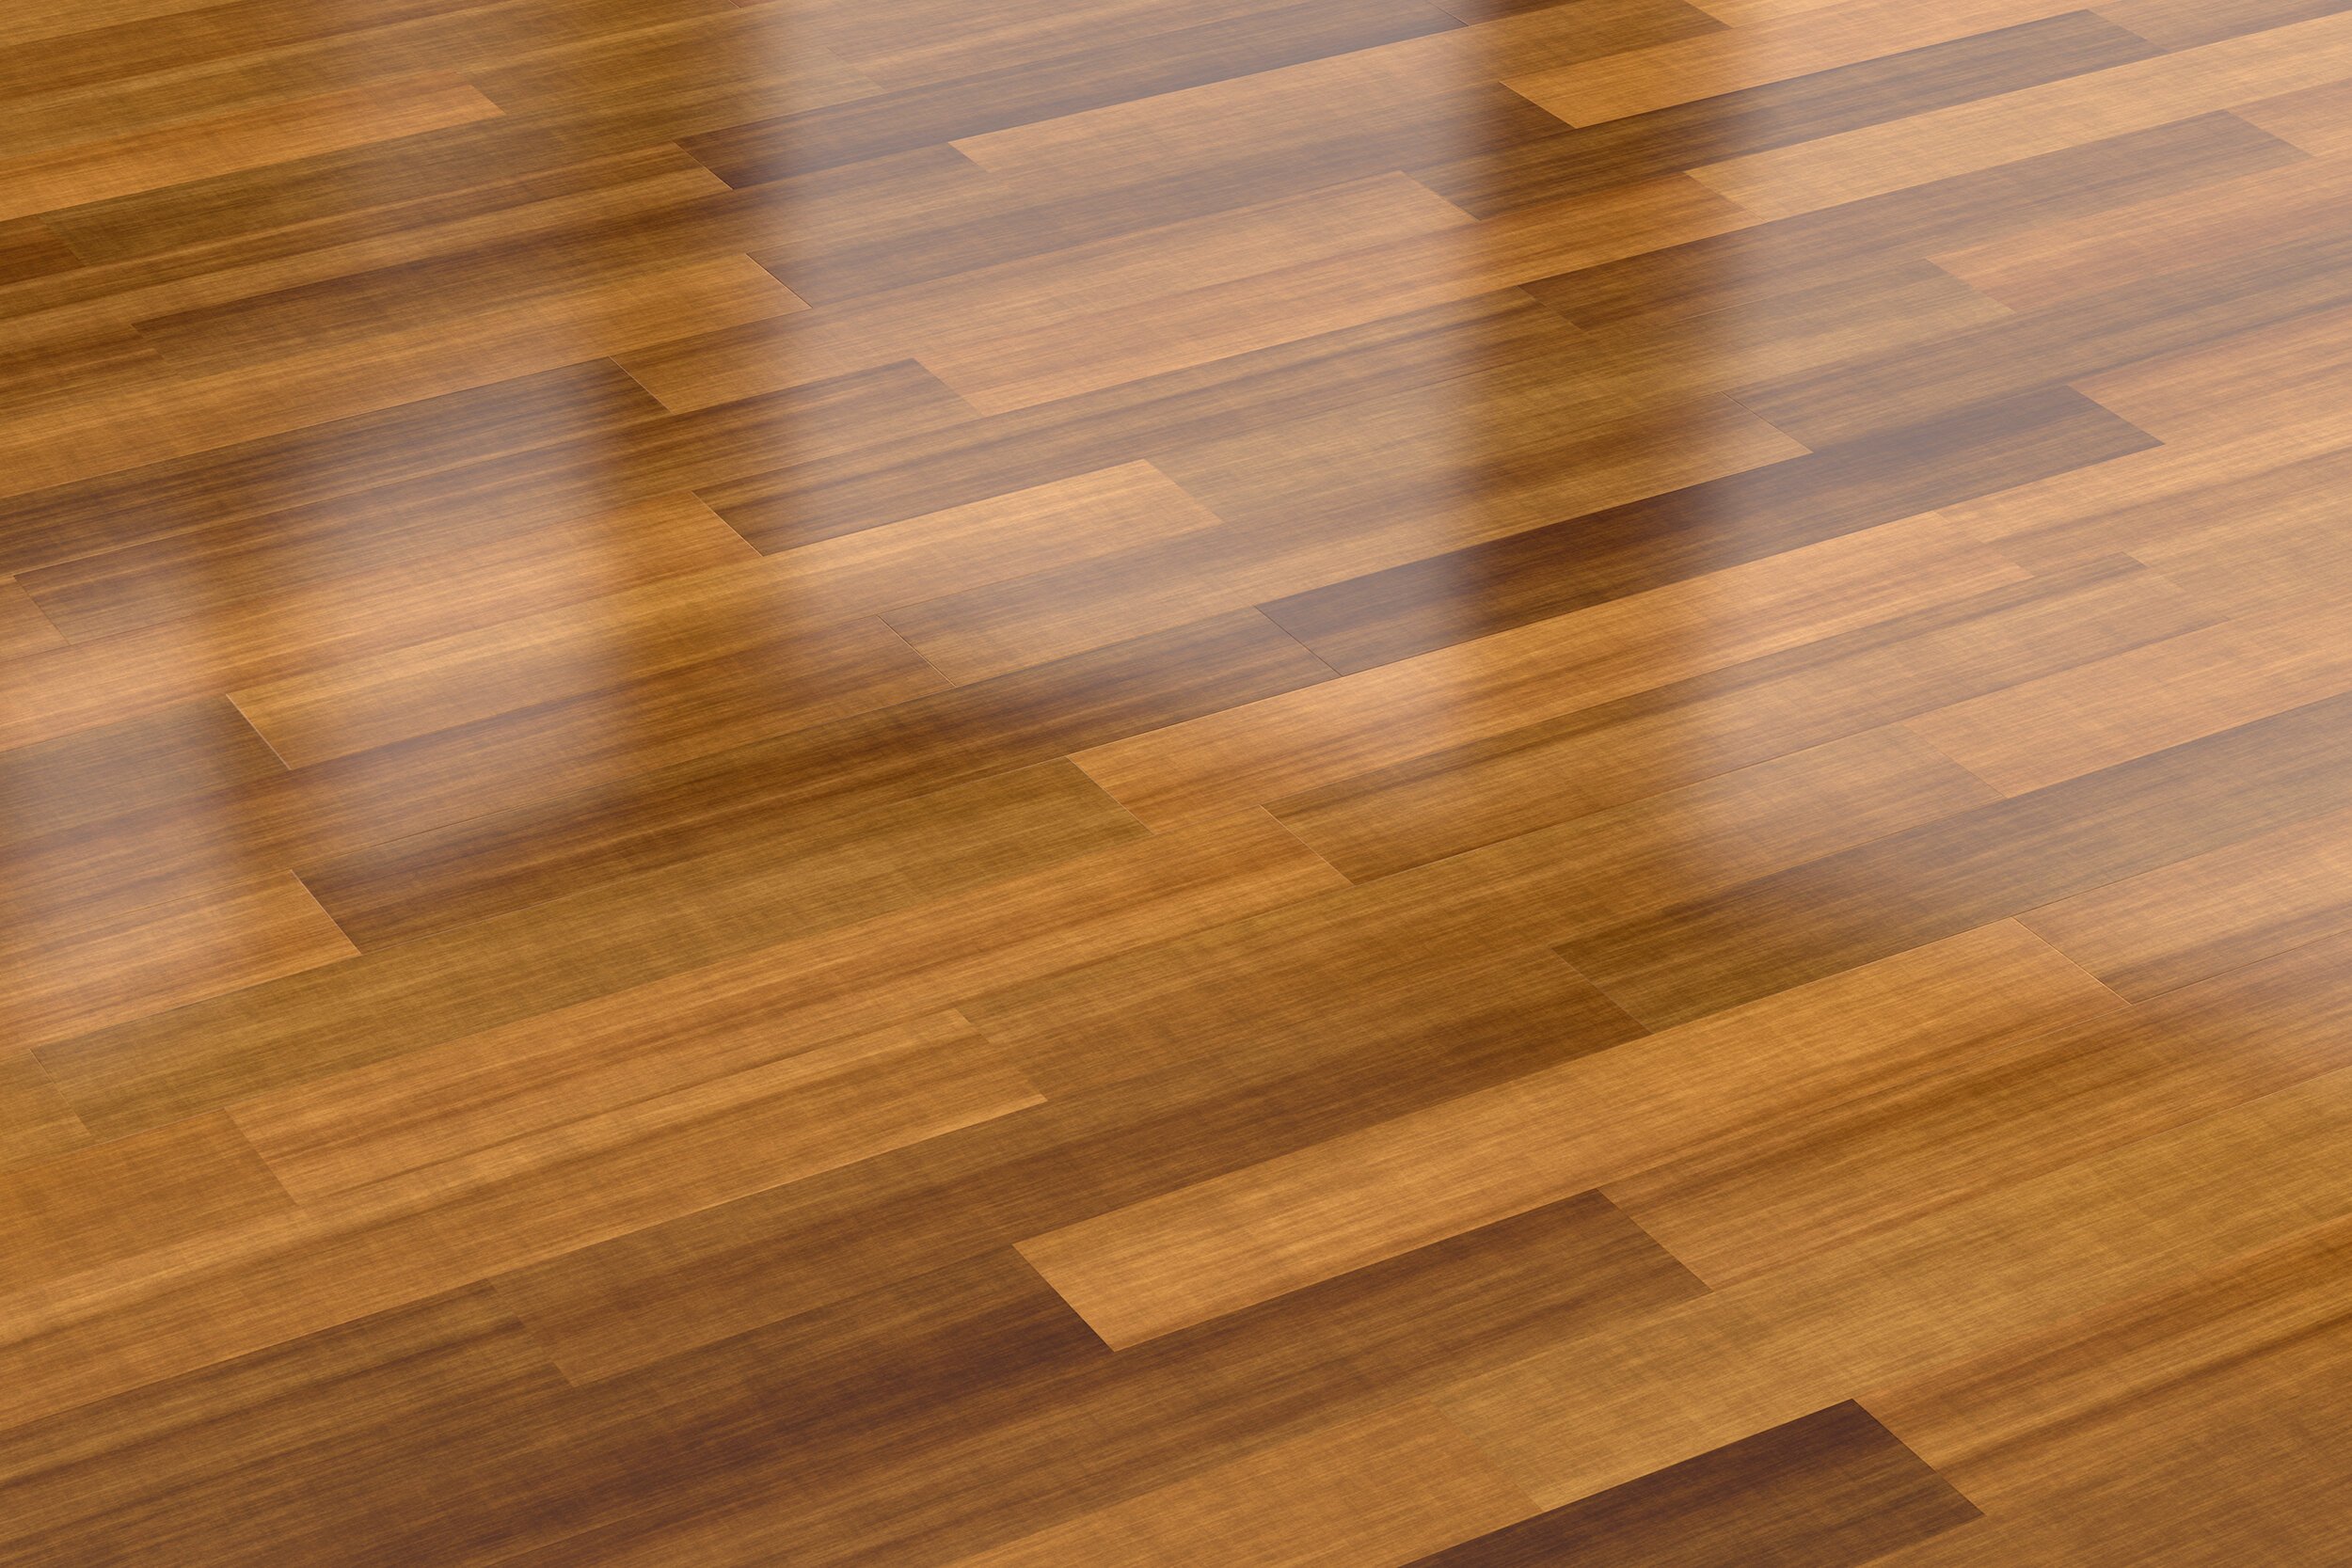 How To Take Care Of Your Wooden Floors In The Colder Months